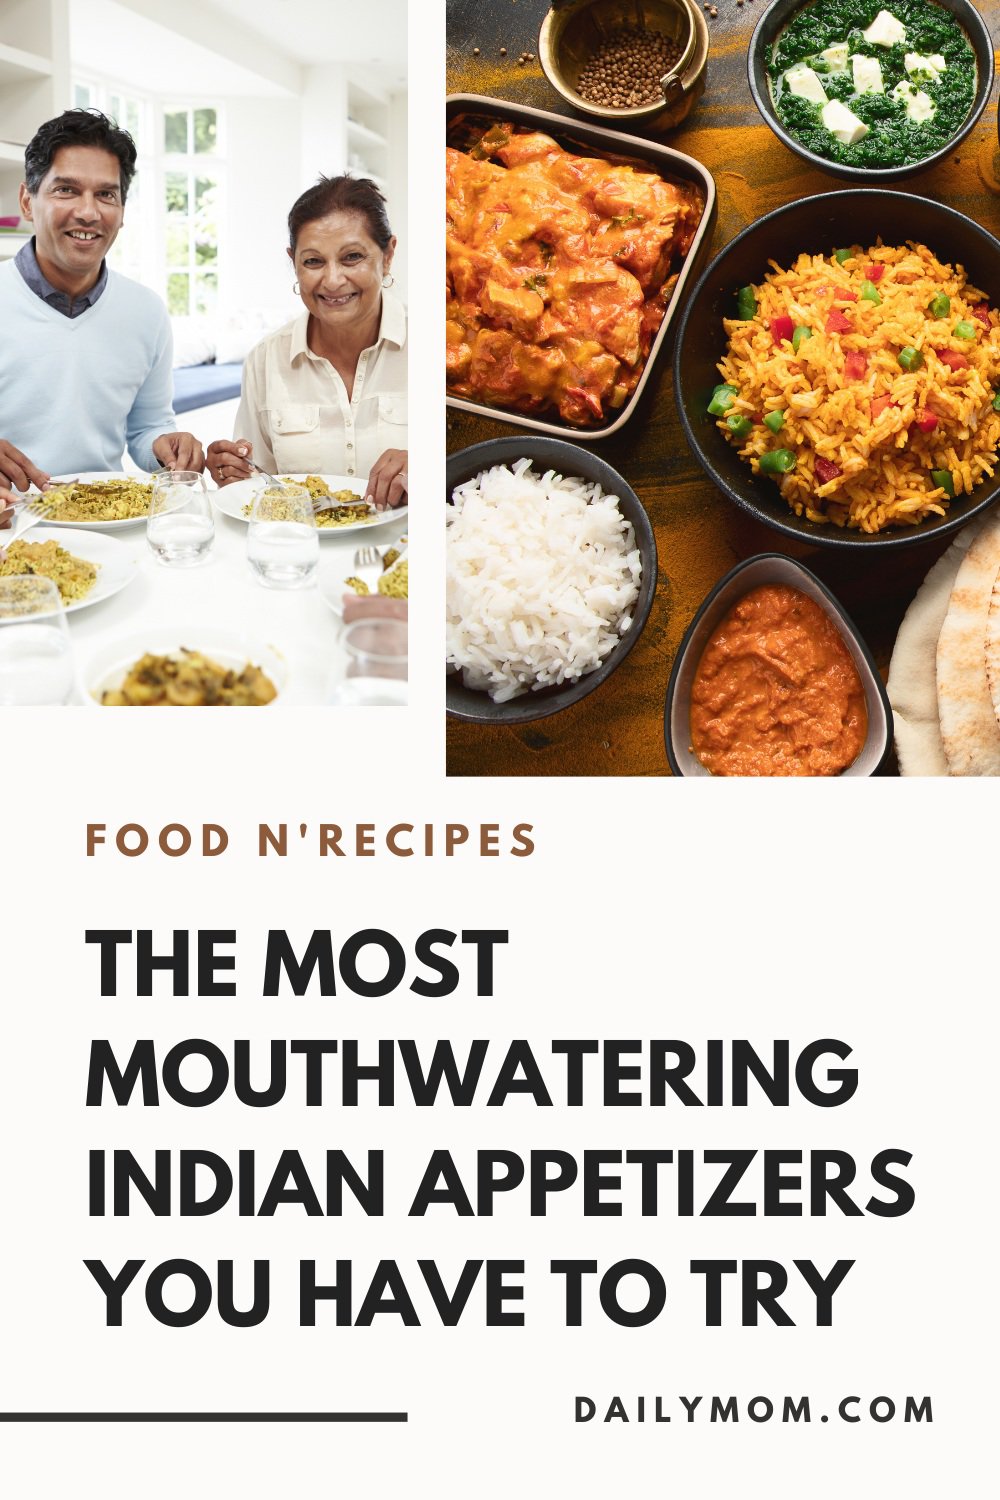 Daily Mom Parent Portal Indian Appetizers Pin